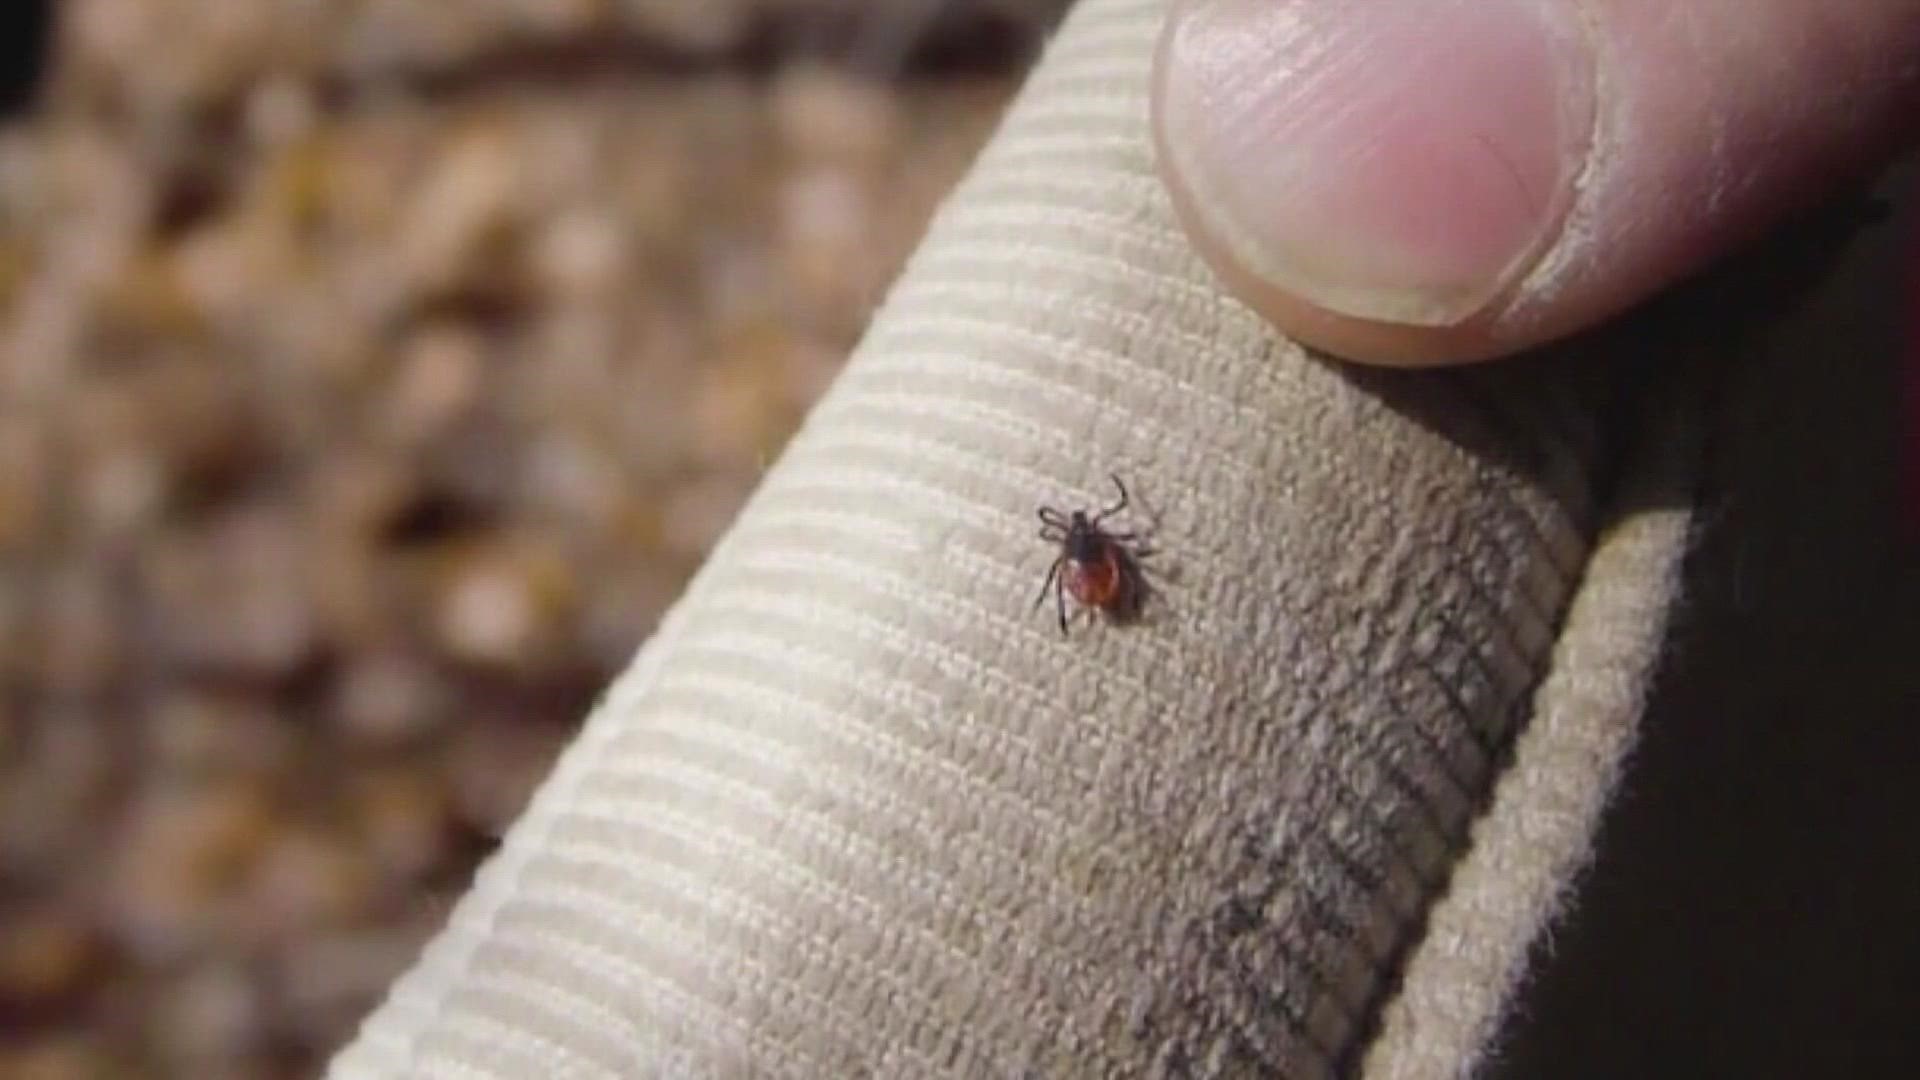 The decades-long study involved thousands of ticks collected from small mammals.